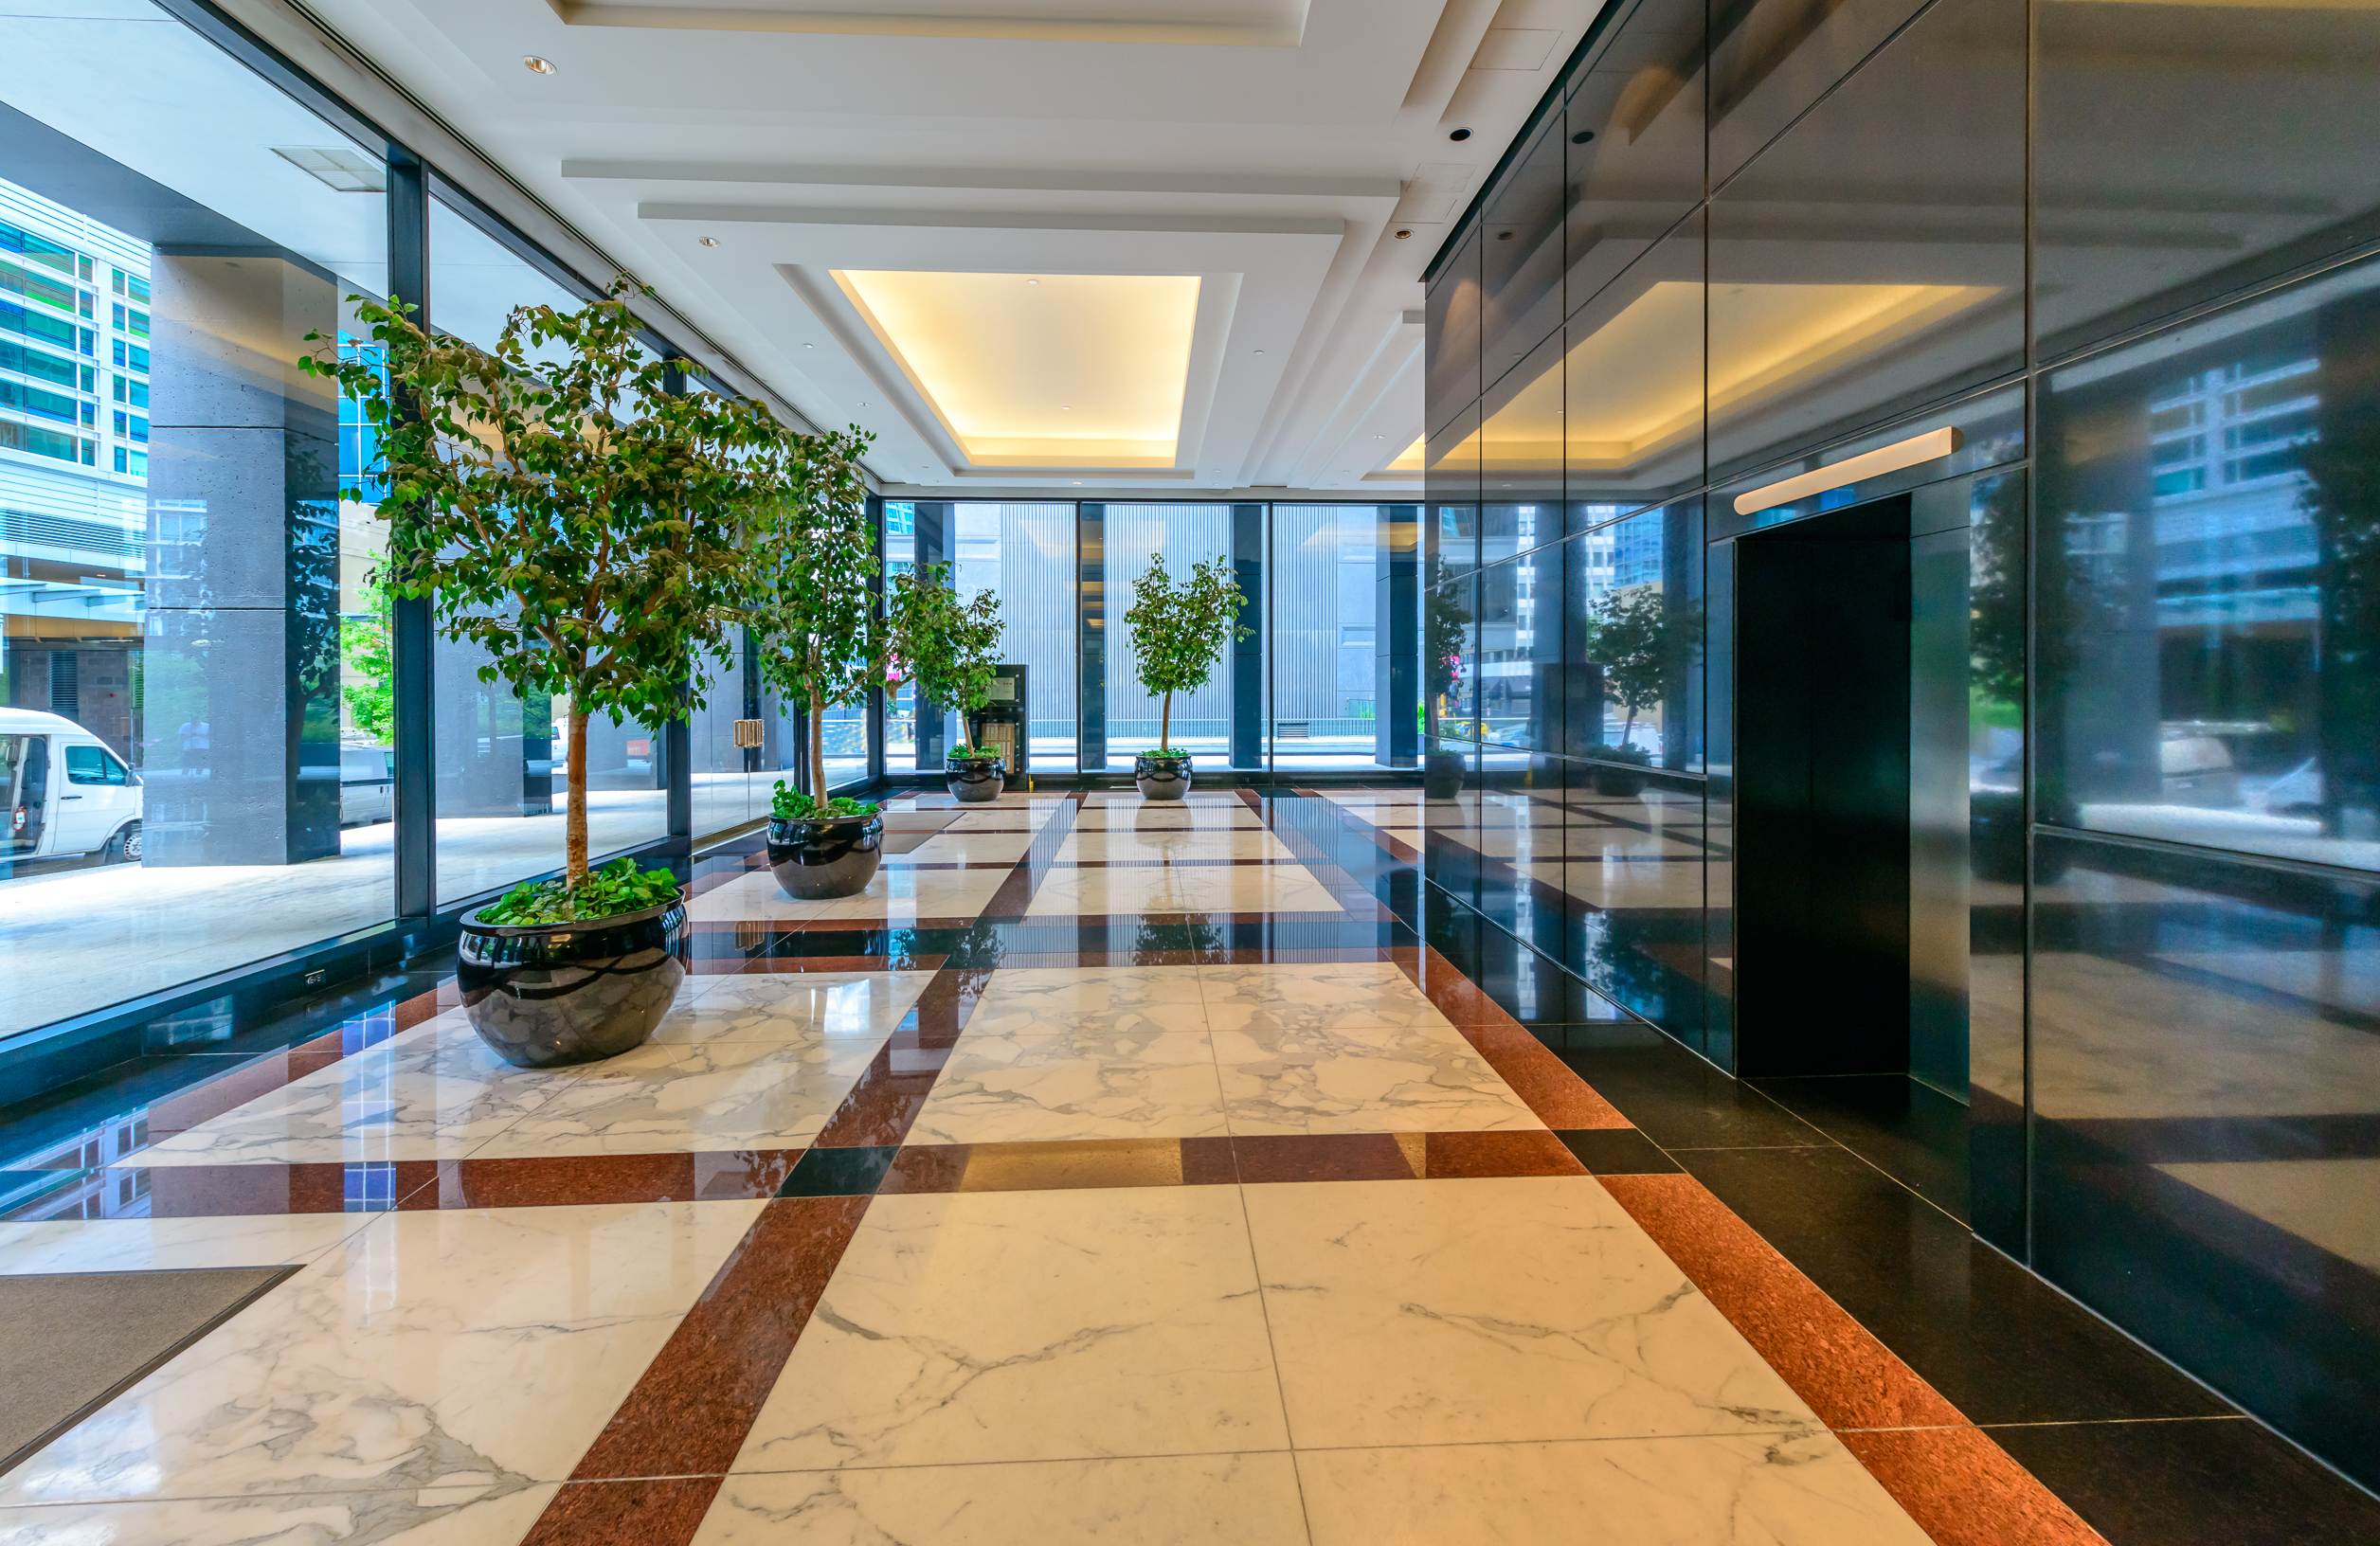 Perspective,Of,The,Modern,Lobby,,Hallway,Of,The,Luxury,Hotel,